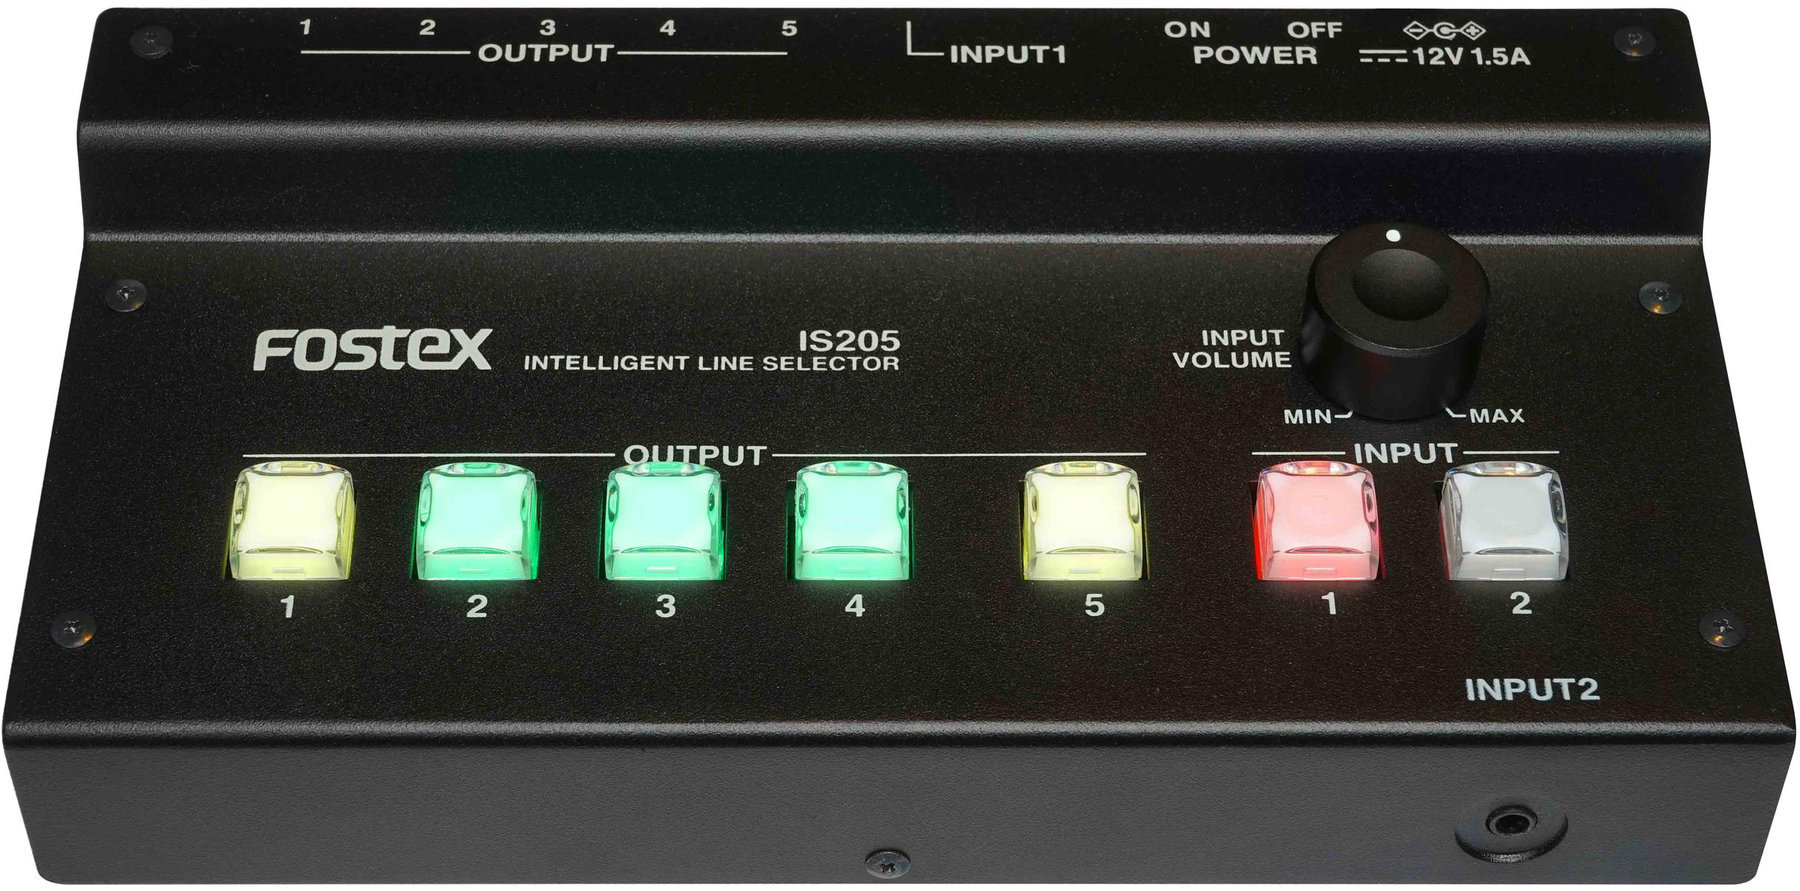 Monitor Selector/controller Fostex IS205